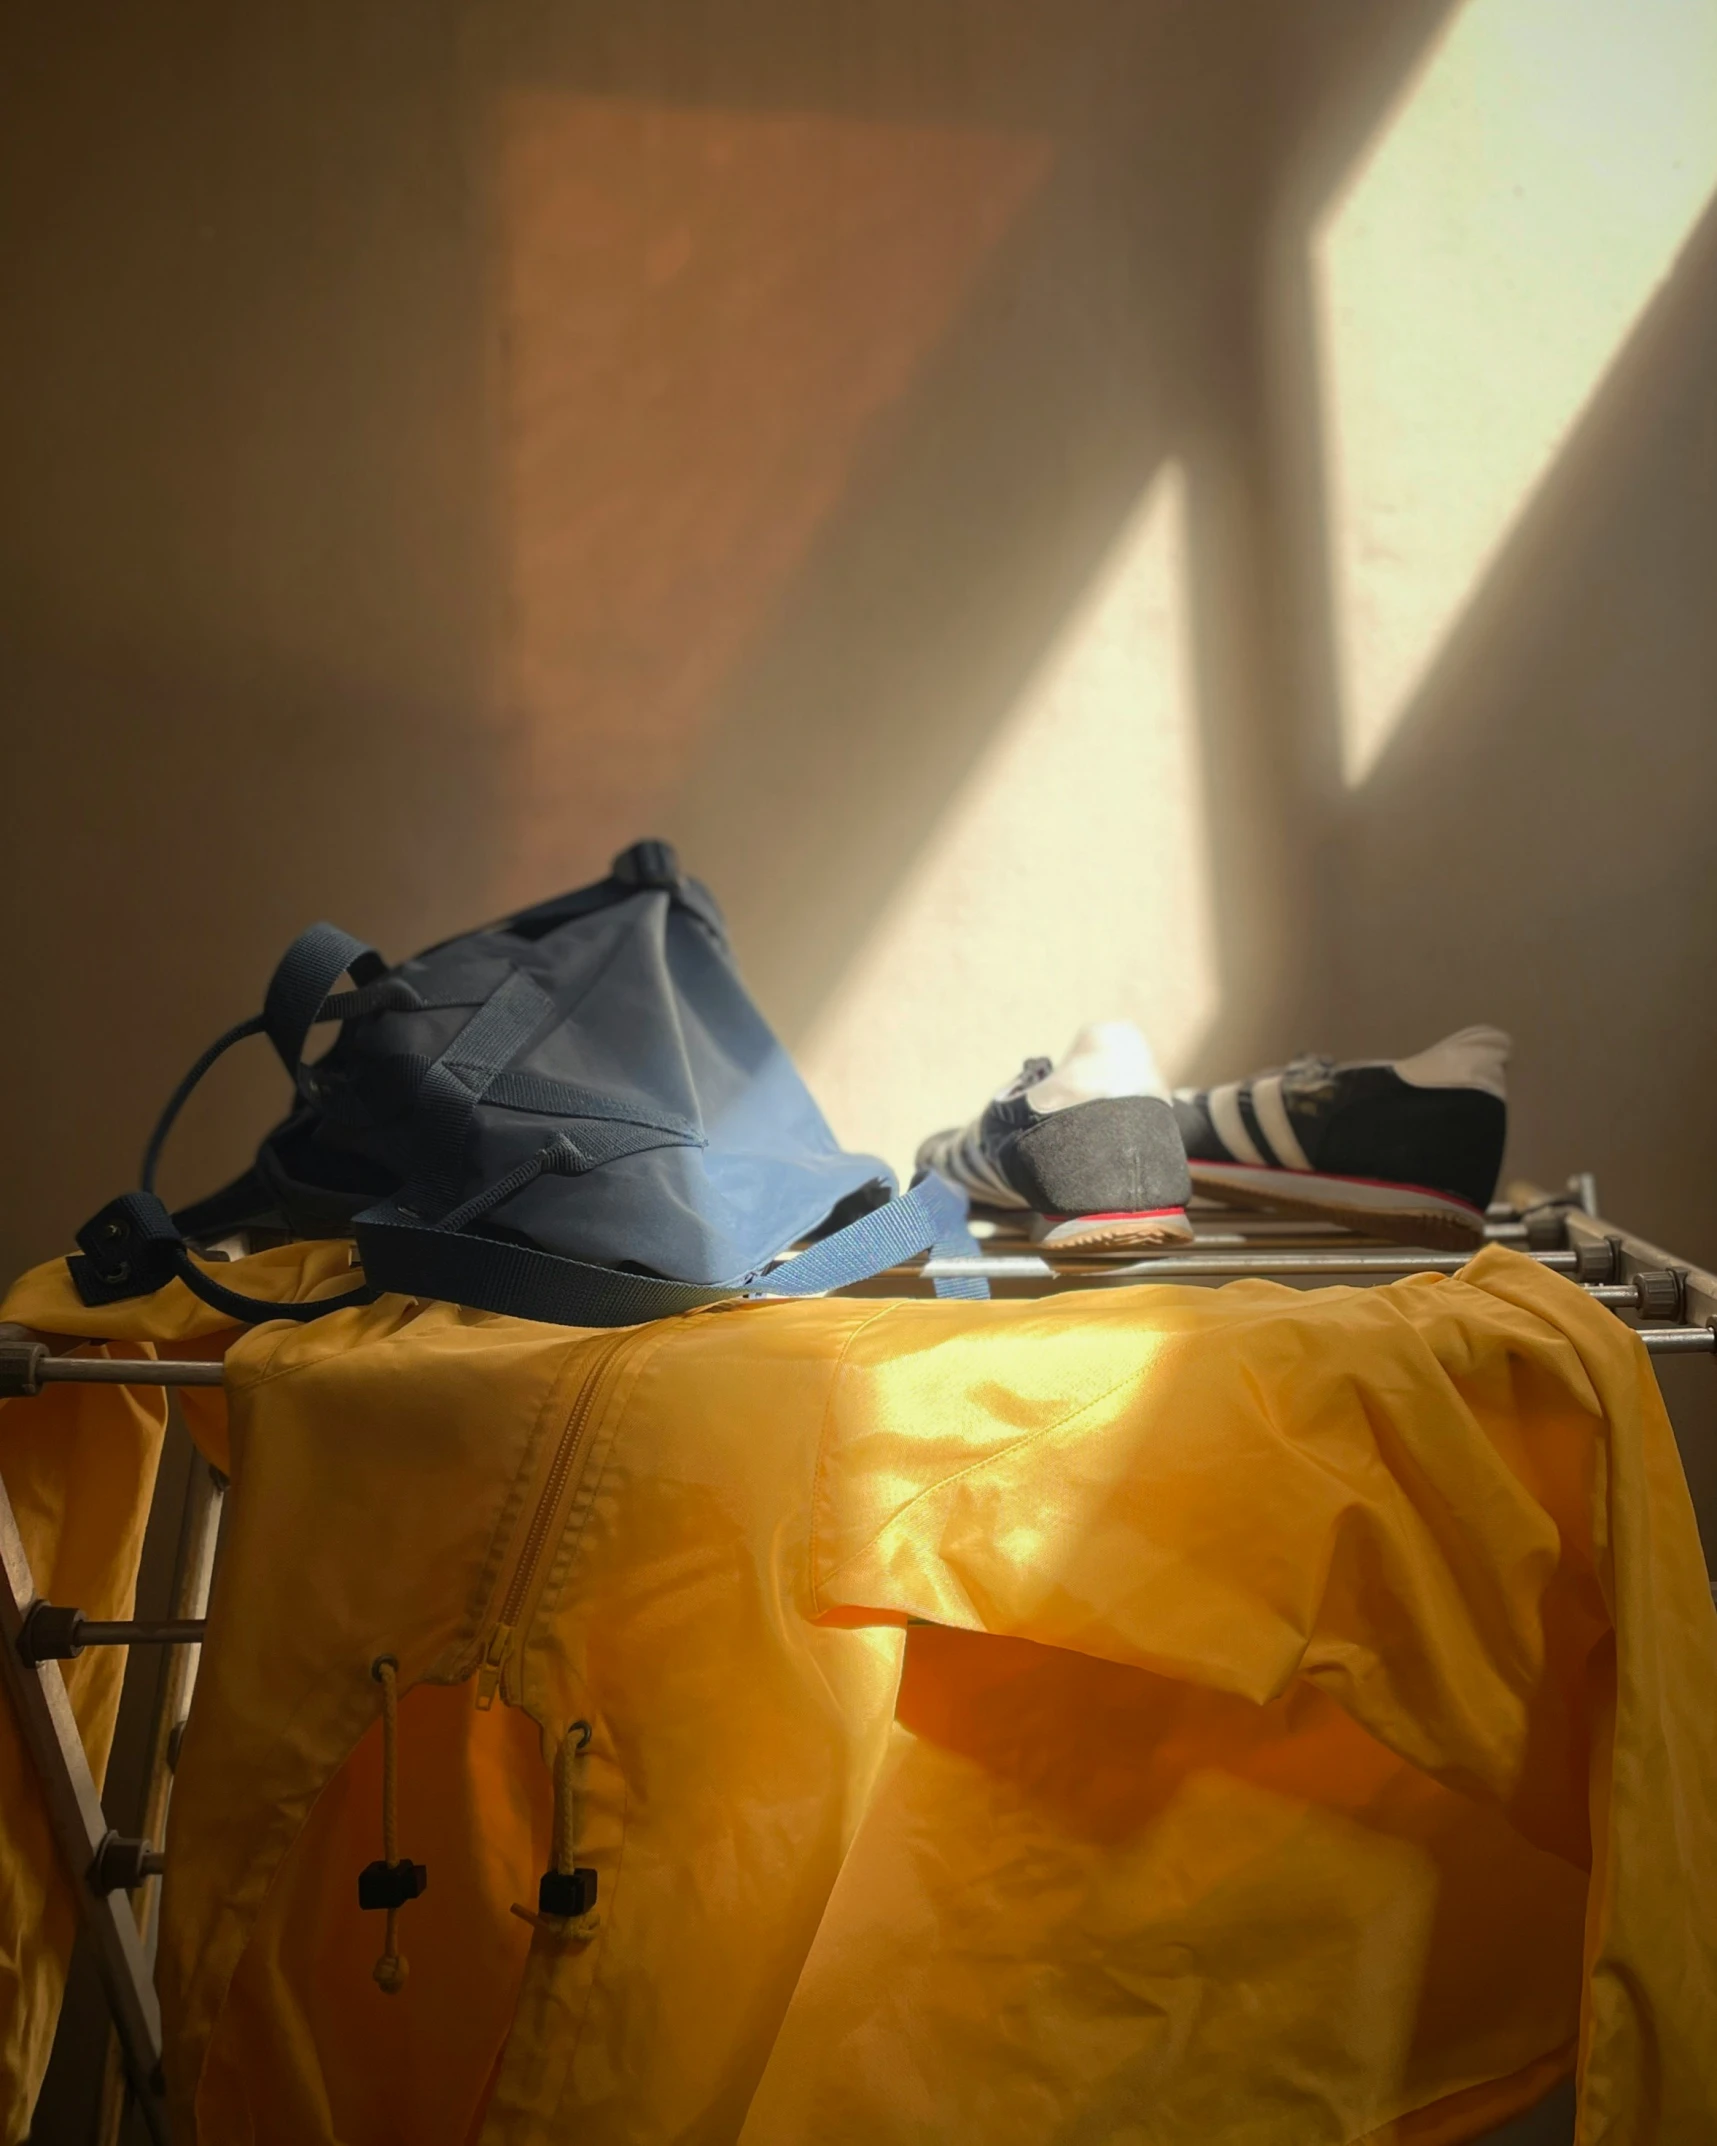 the sun is shining brightly on the room with several items laid out on a bed